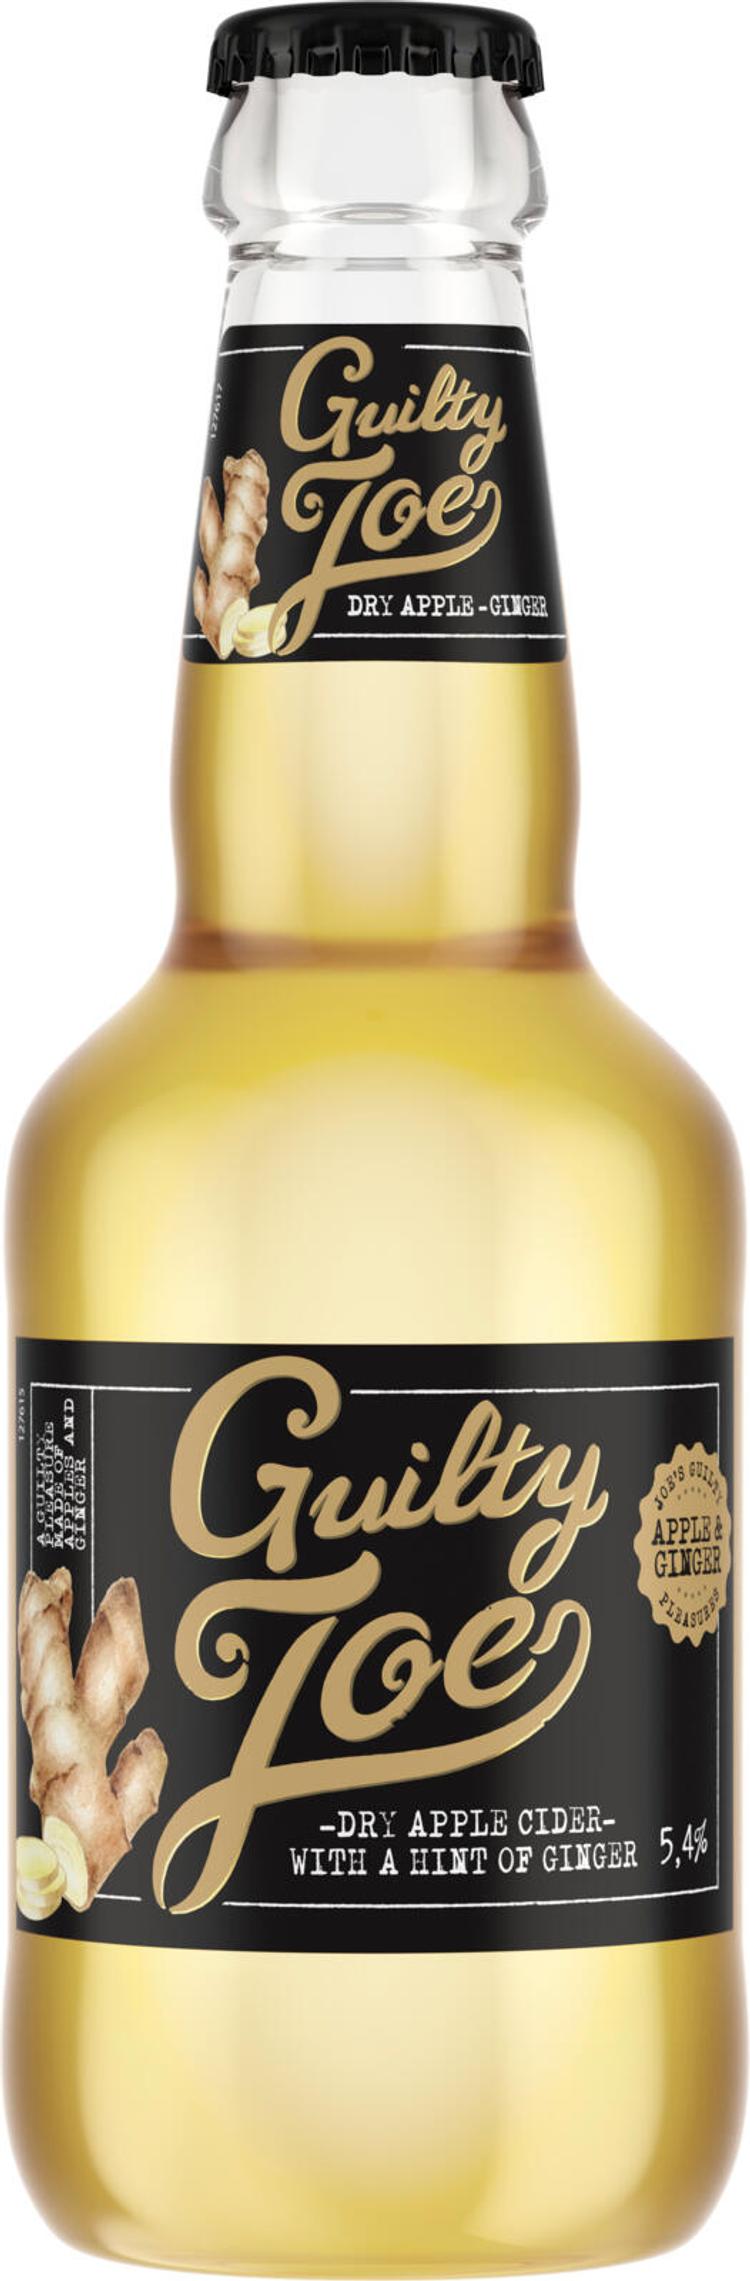 Happy Joe Guilty Joe Dry Apple with a hint of Ginger siideri 5,4% 0,275 l